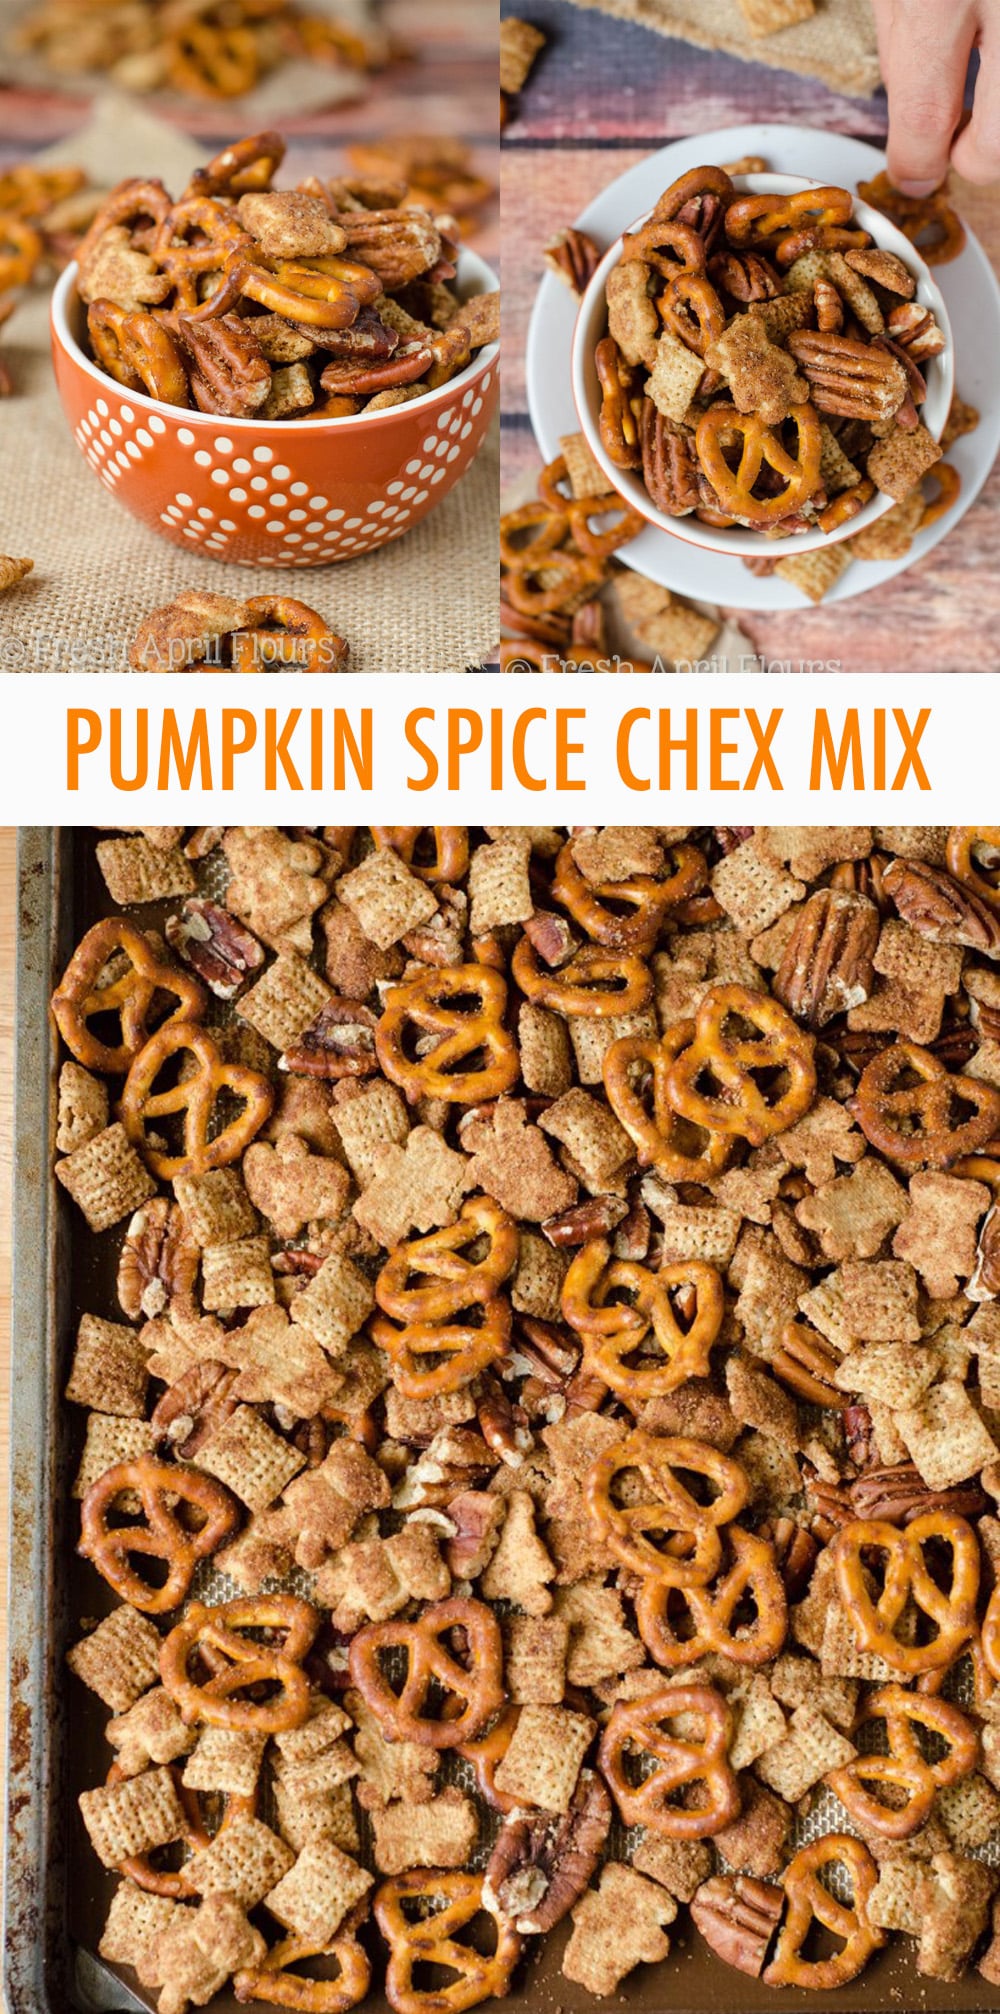 A sweet and salty snack mix packed with pumpkin spice flavor. A must-have for cozy weather snacking! via @frshaprilflours